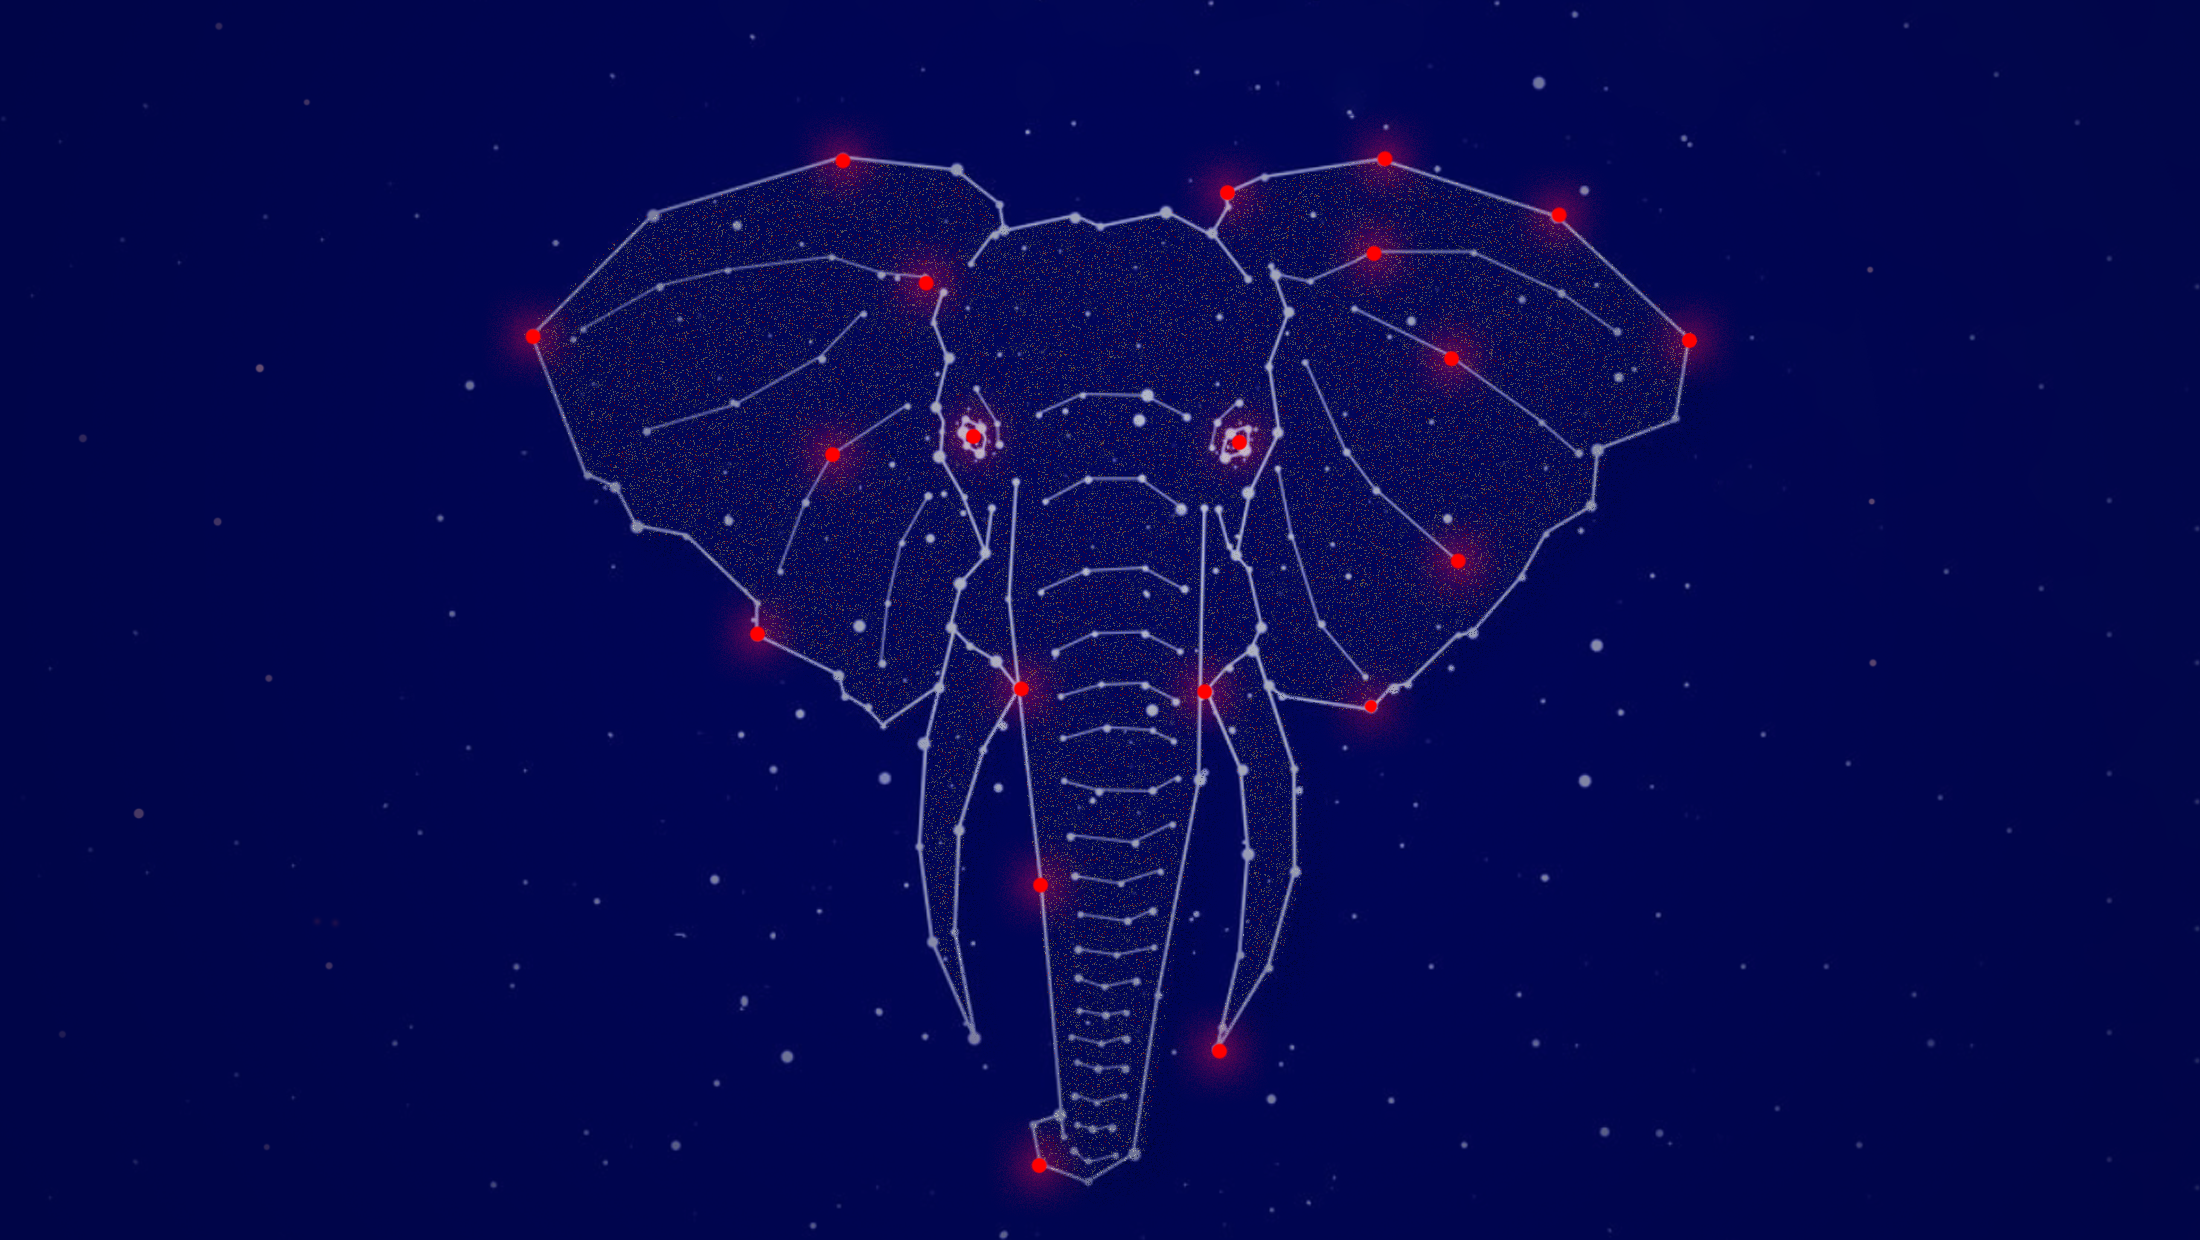 Dark blue background with a constellation in the shape of an elephant's head with red dots